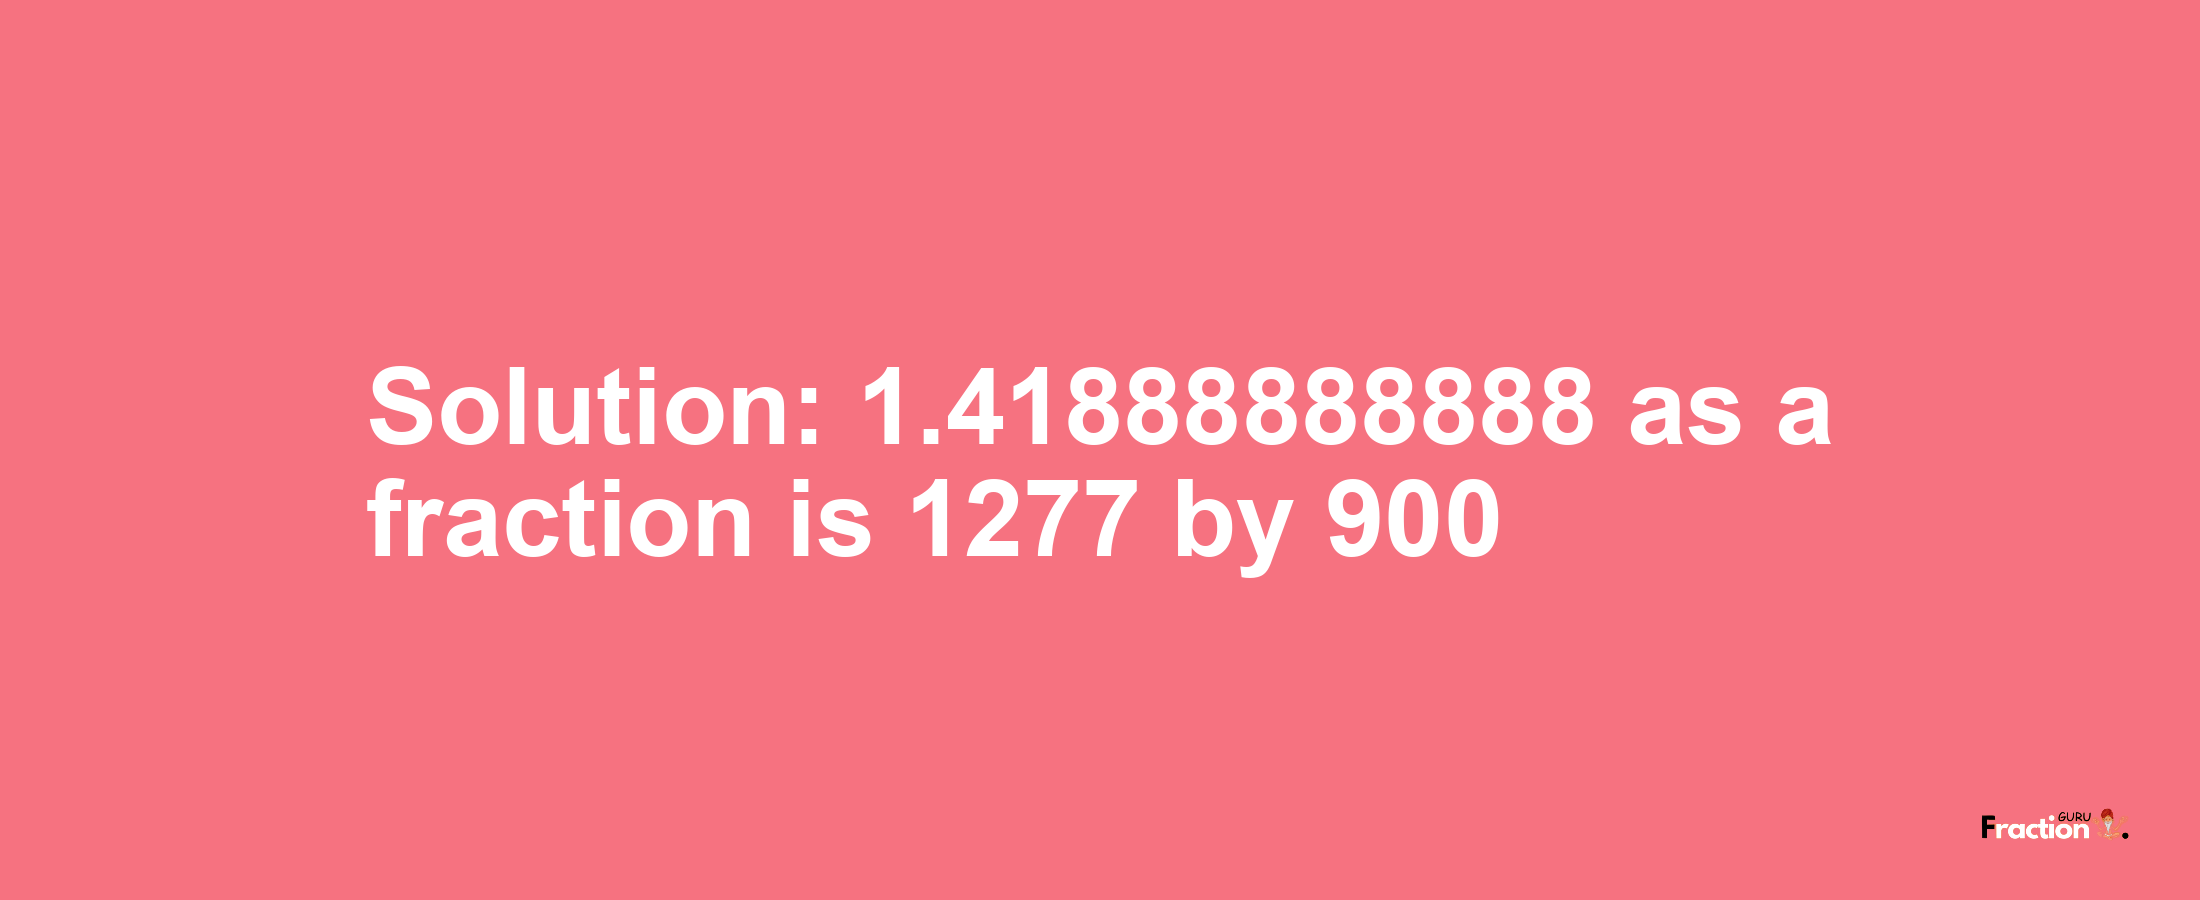 Solution:1.41888888888 as a fraction is 1277/900